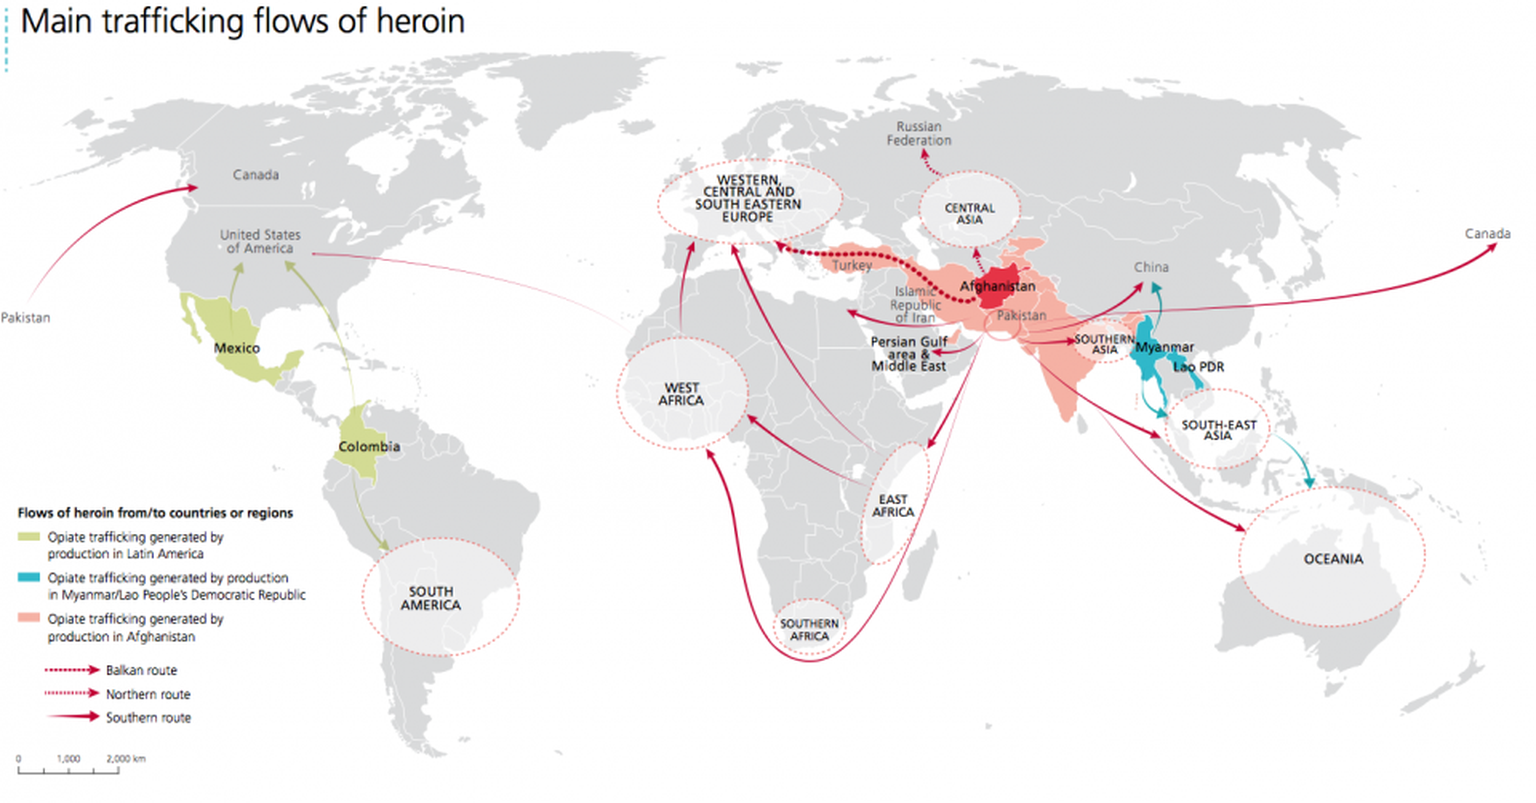 In 2015, the global opiate market appeared to be stable despite important regional changes.